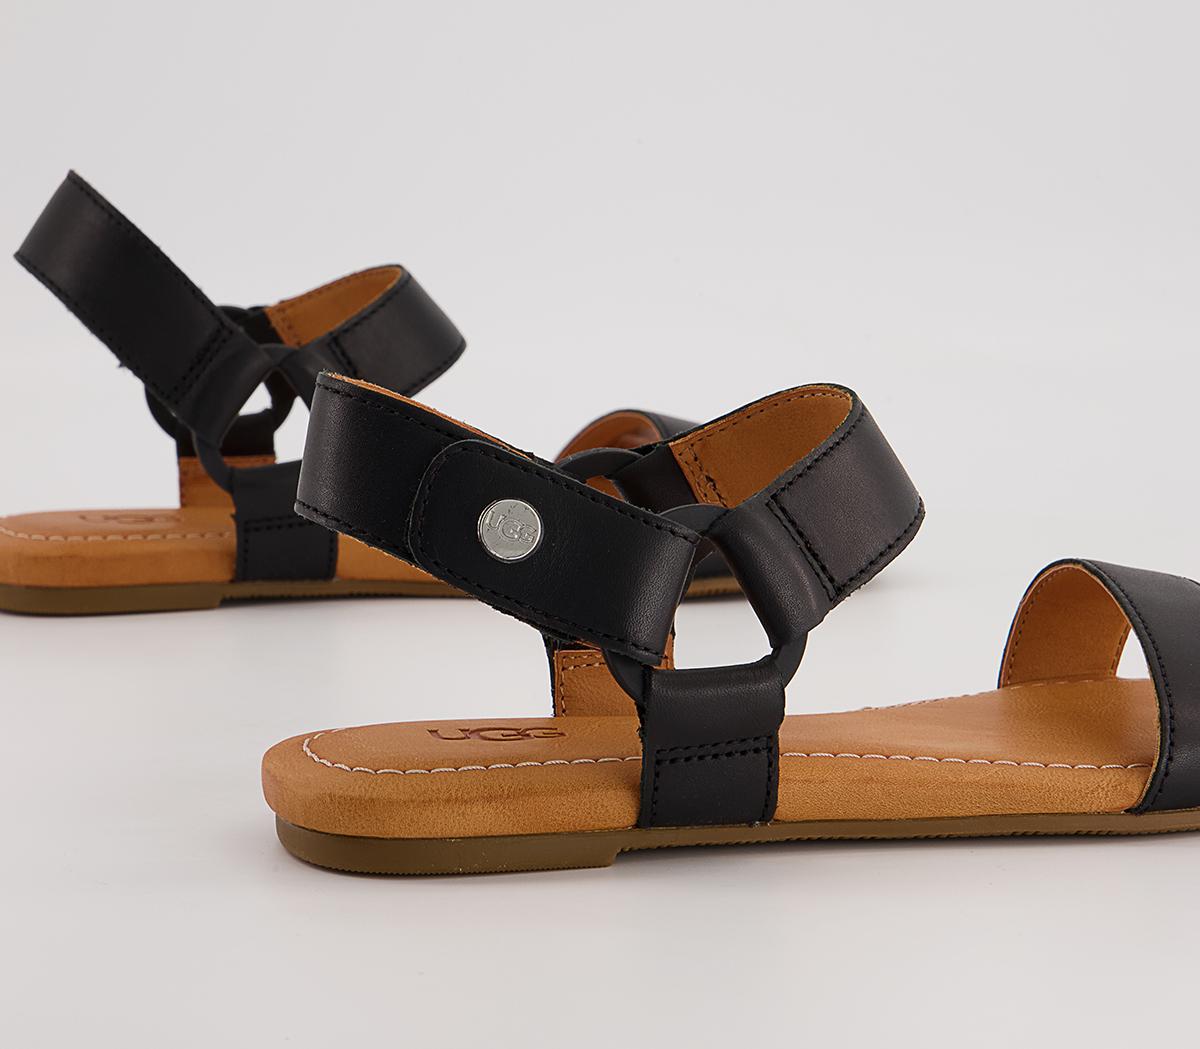 UGG Rynell Sandals Black Leather - Women’s Sandals